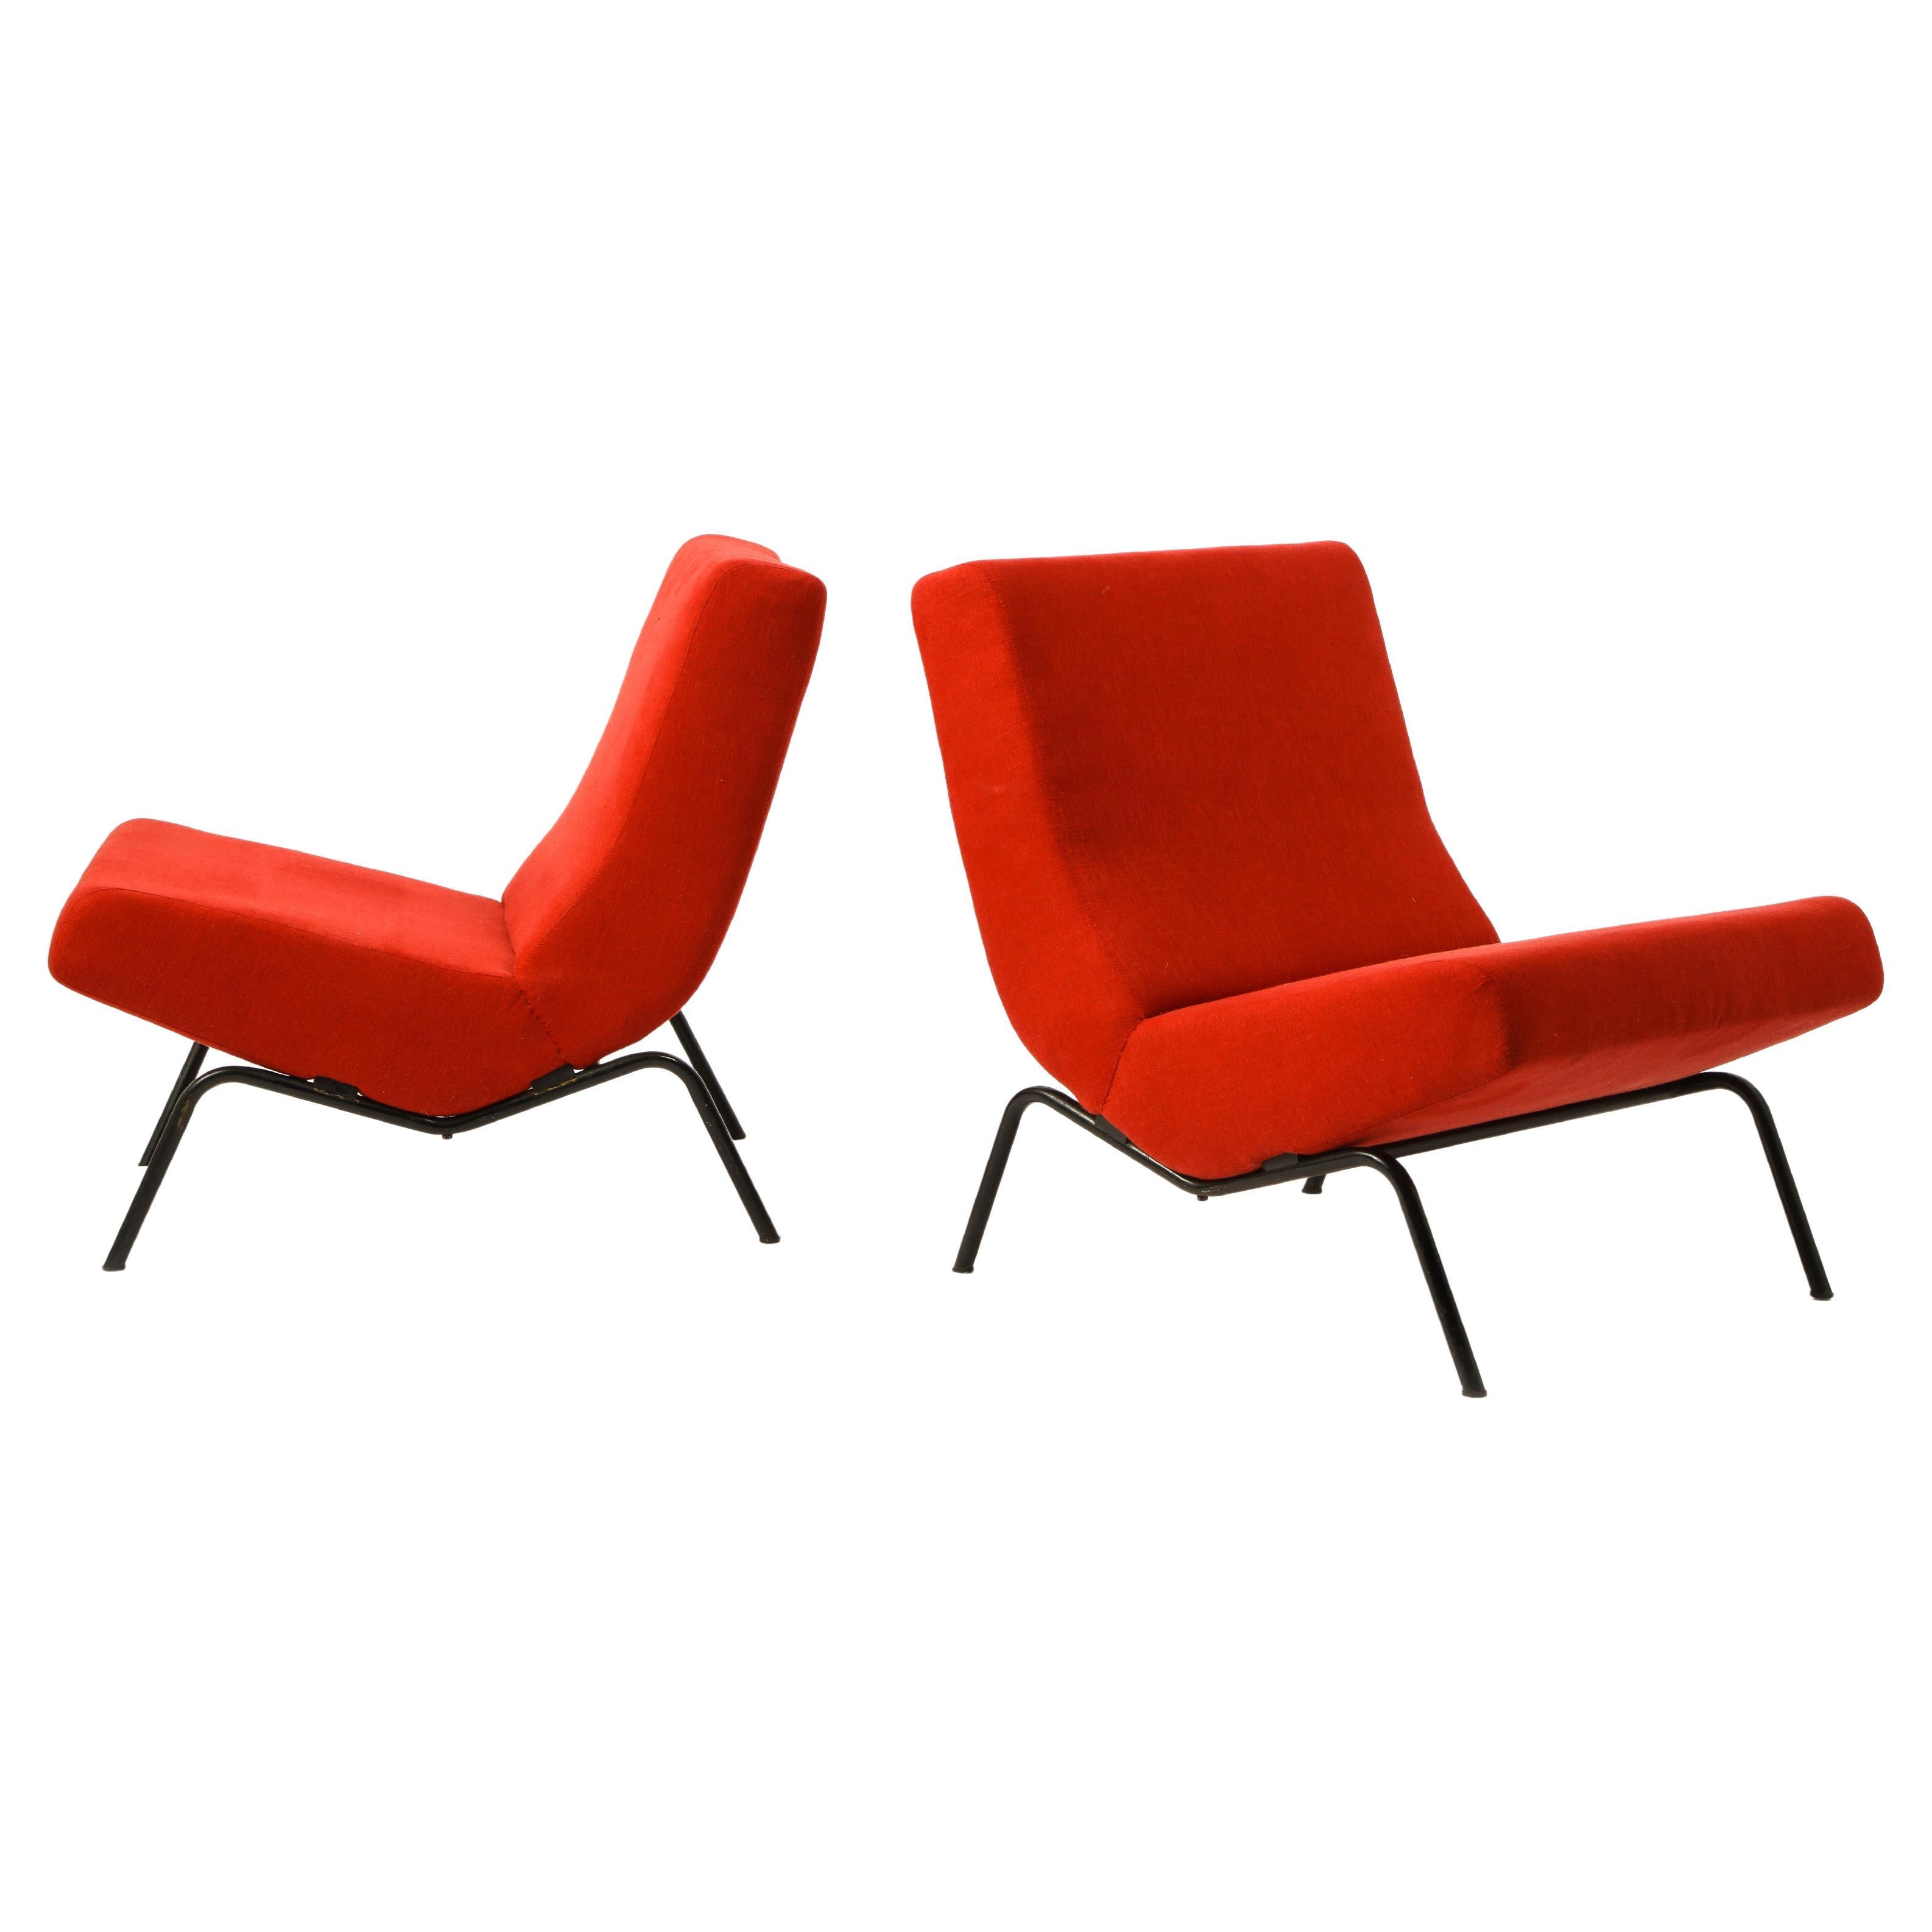 Pierre Paulin Pair of Red CM 195 Chairs, Netherlands 1960's